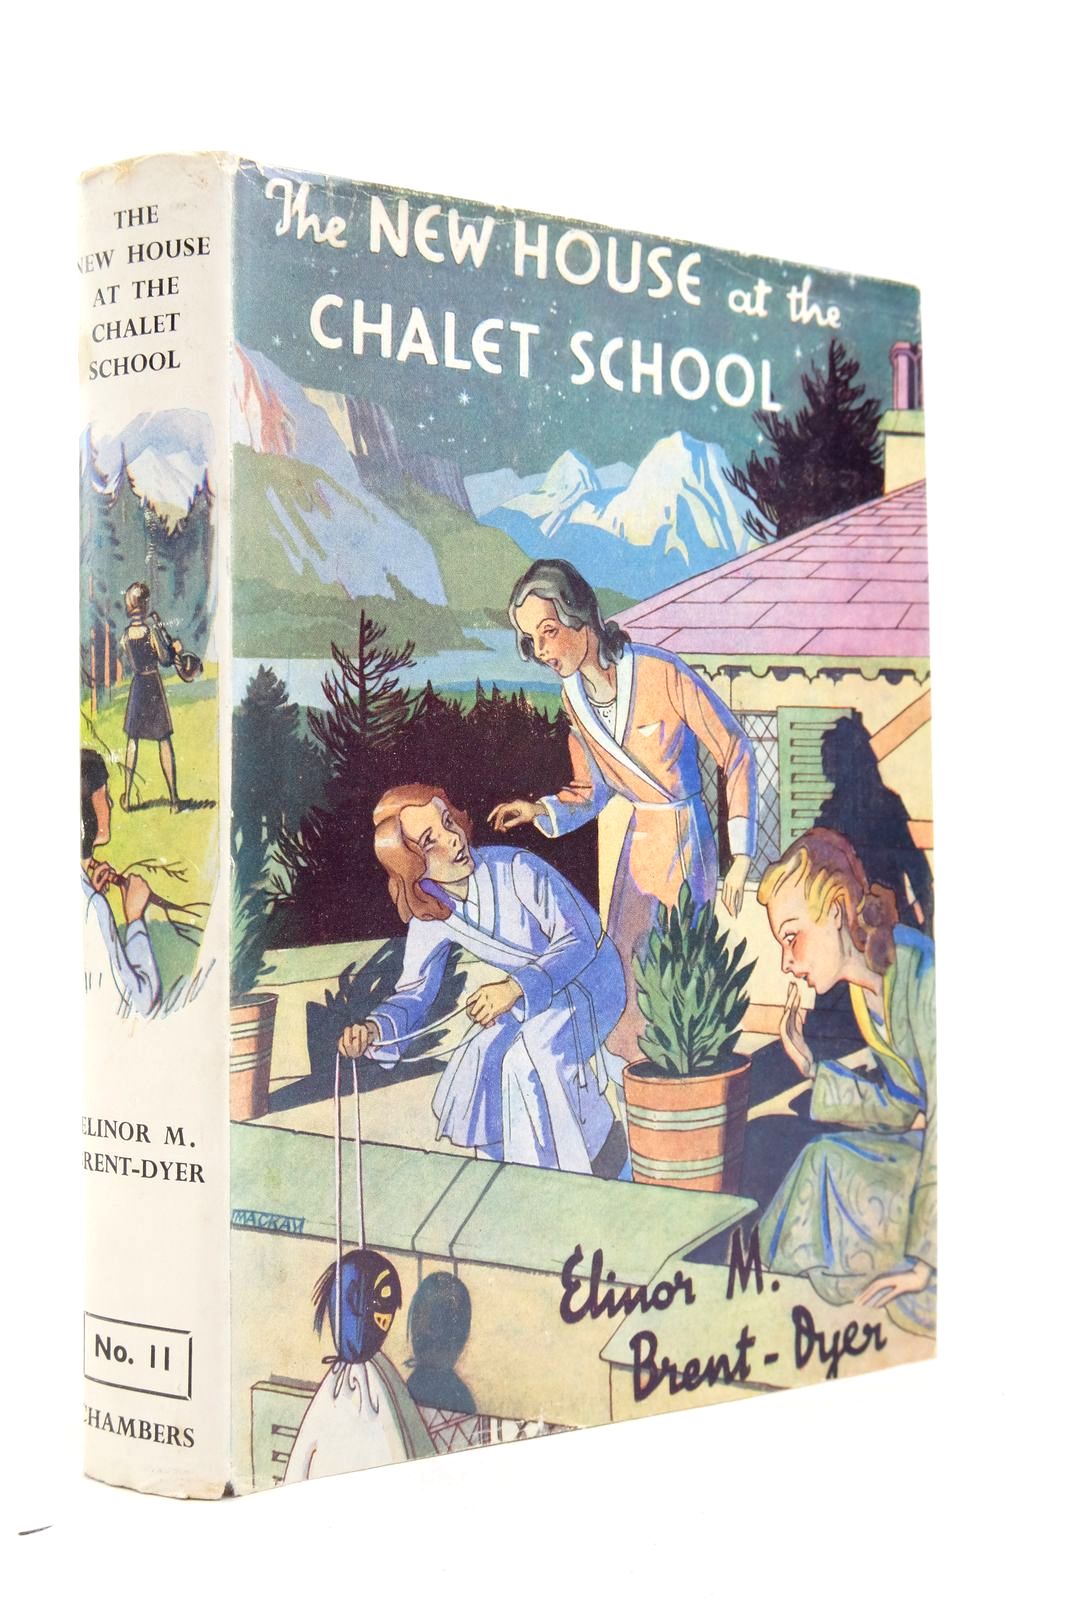 Photo of THE NEW HOUSE AT THE CHALET SCHOOL written by Brent-Dyer, Elinor M. published by W. &amp; R. Chambers Limited (STOCK CODE: 2140080)  for sale by Stella & Rose's Books